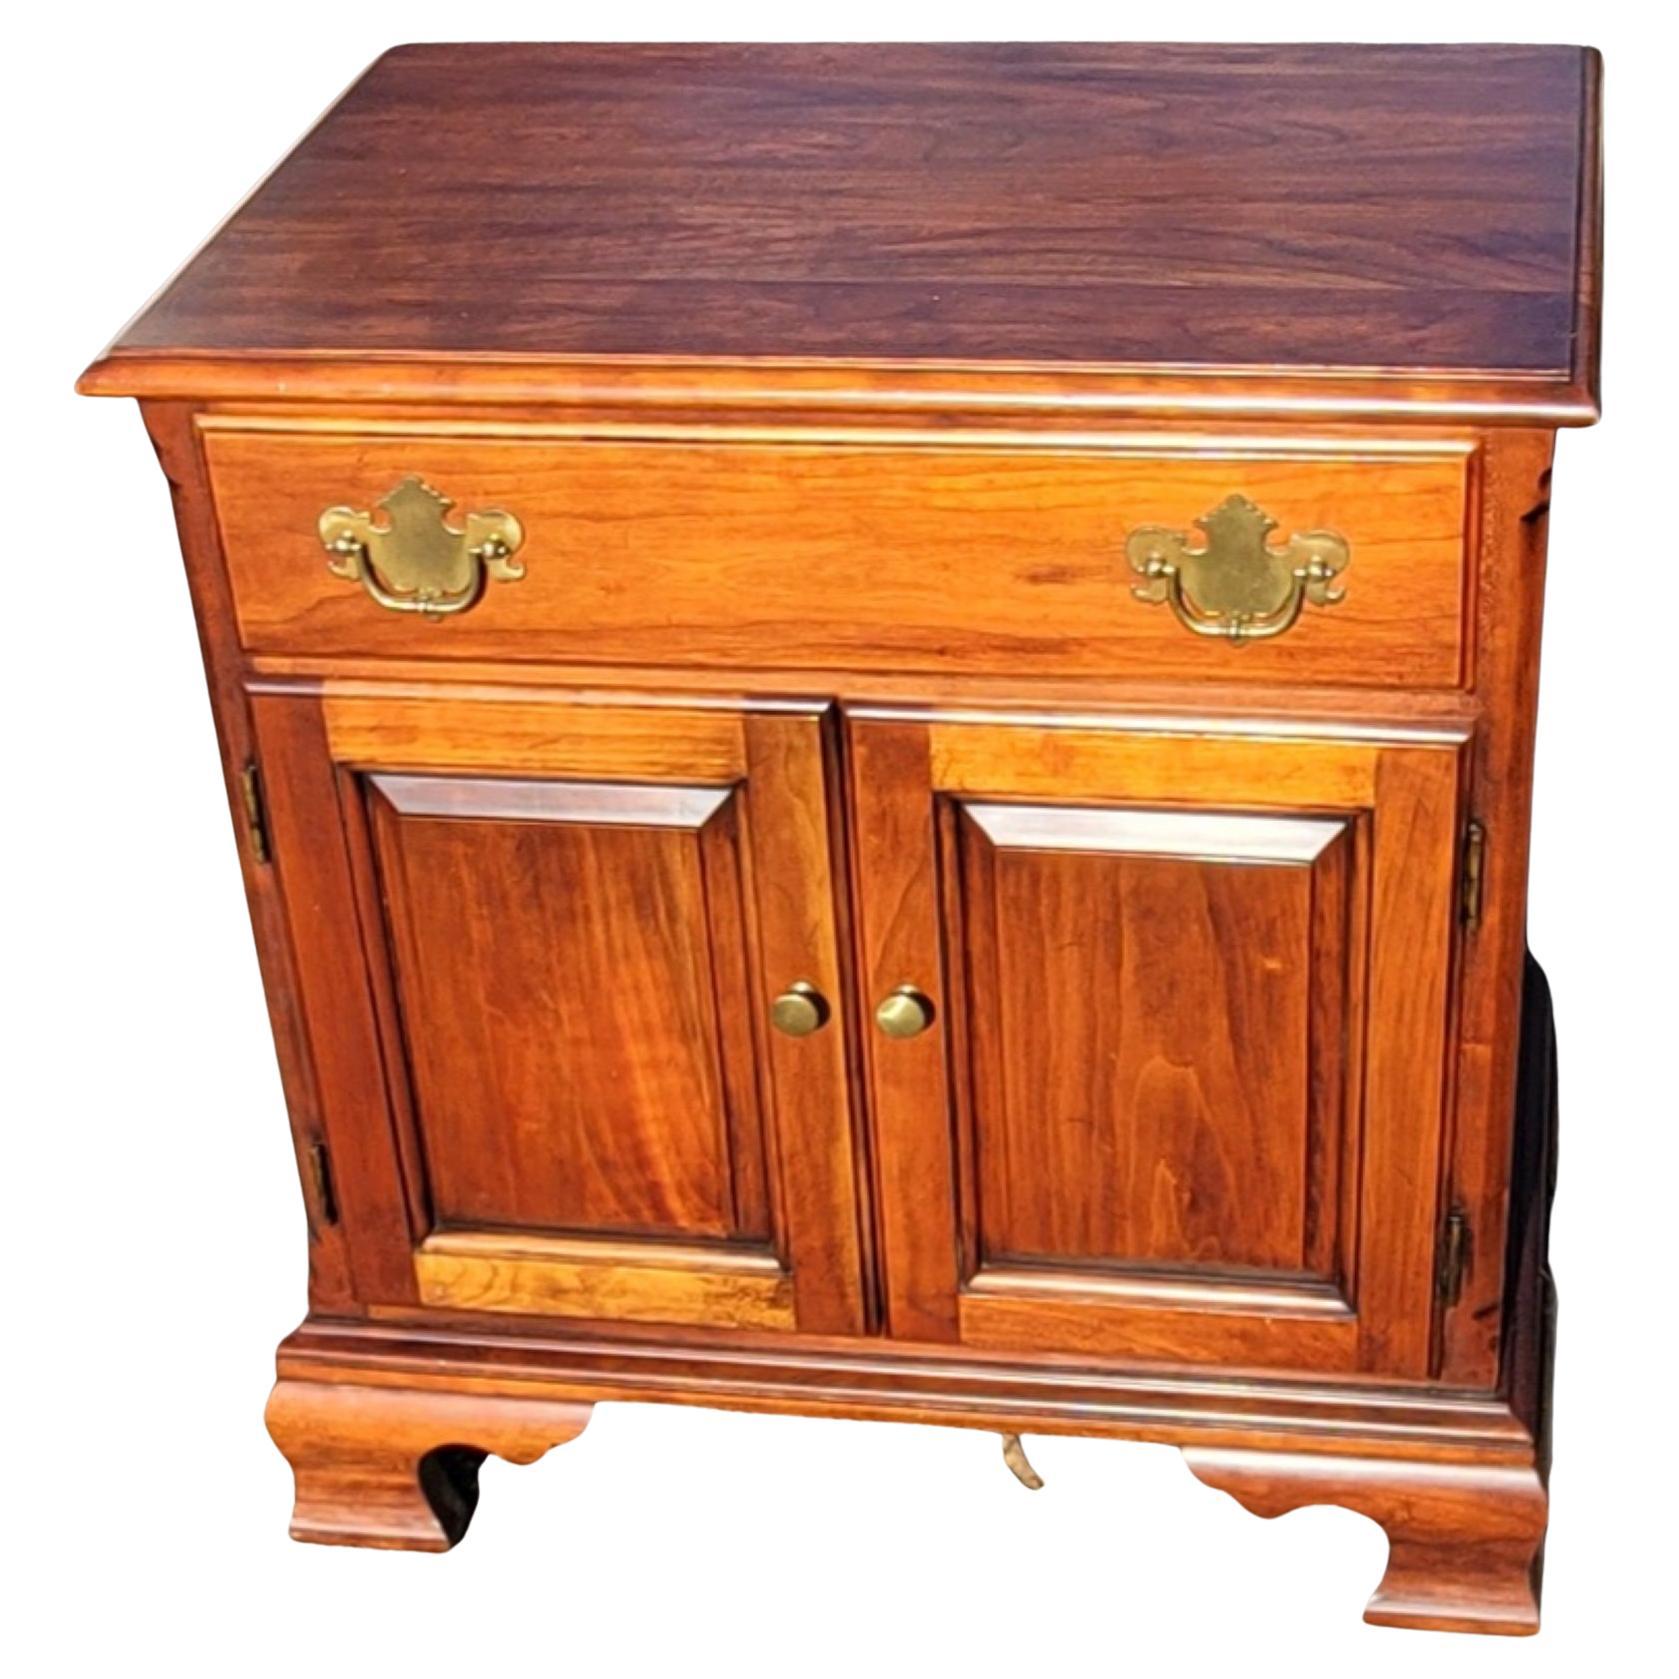 A Statton Trutype Furniture solid chery one drawer bedside table cabinet in excellent condition. 
Measures 24.75